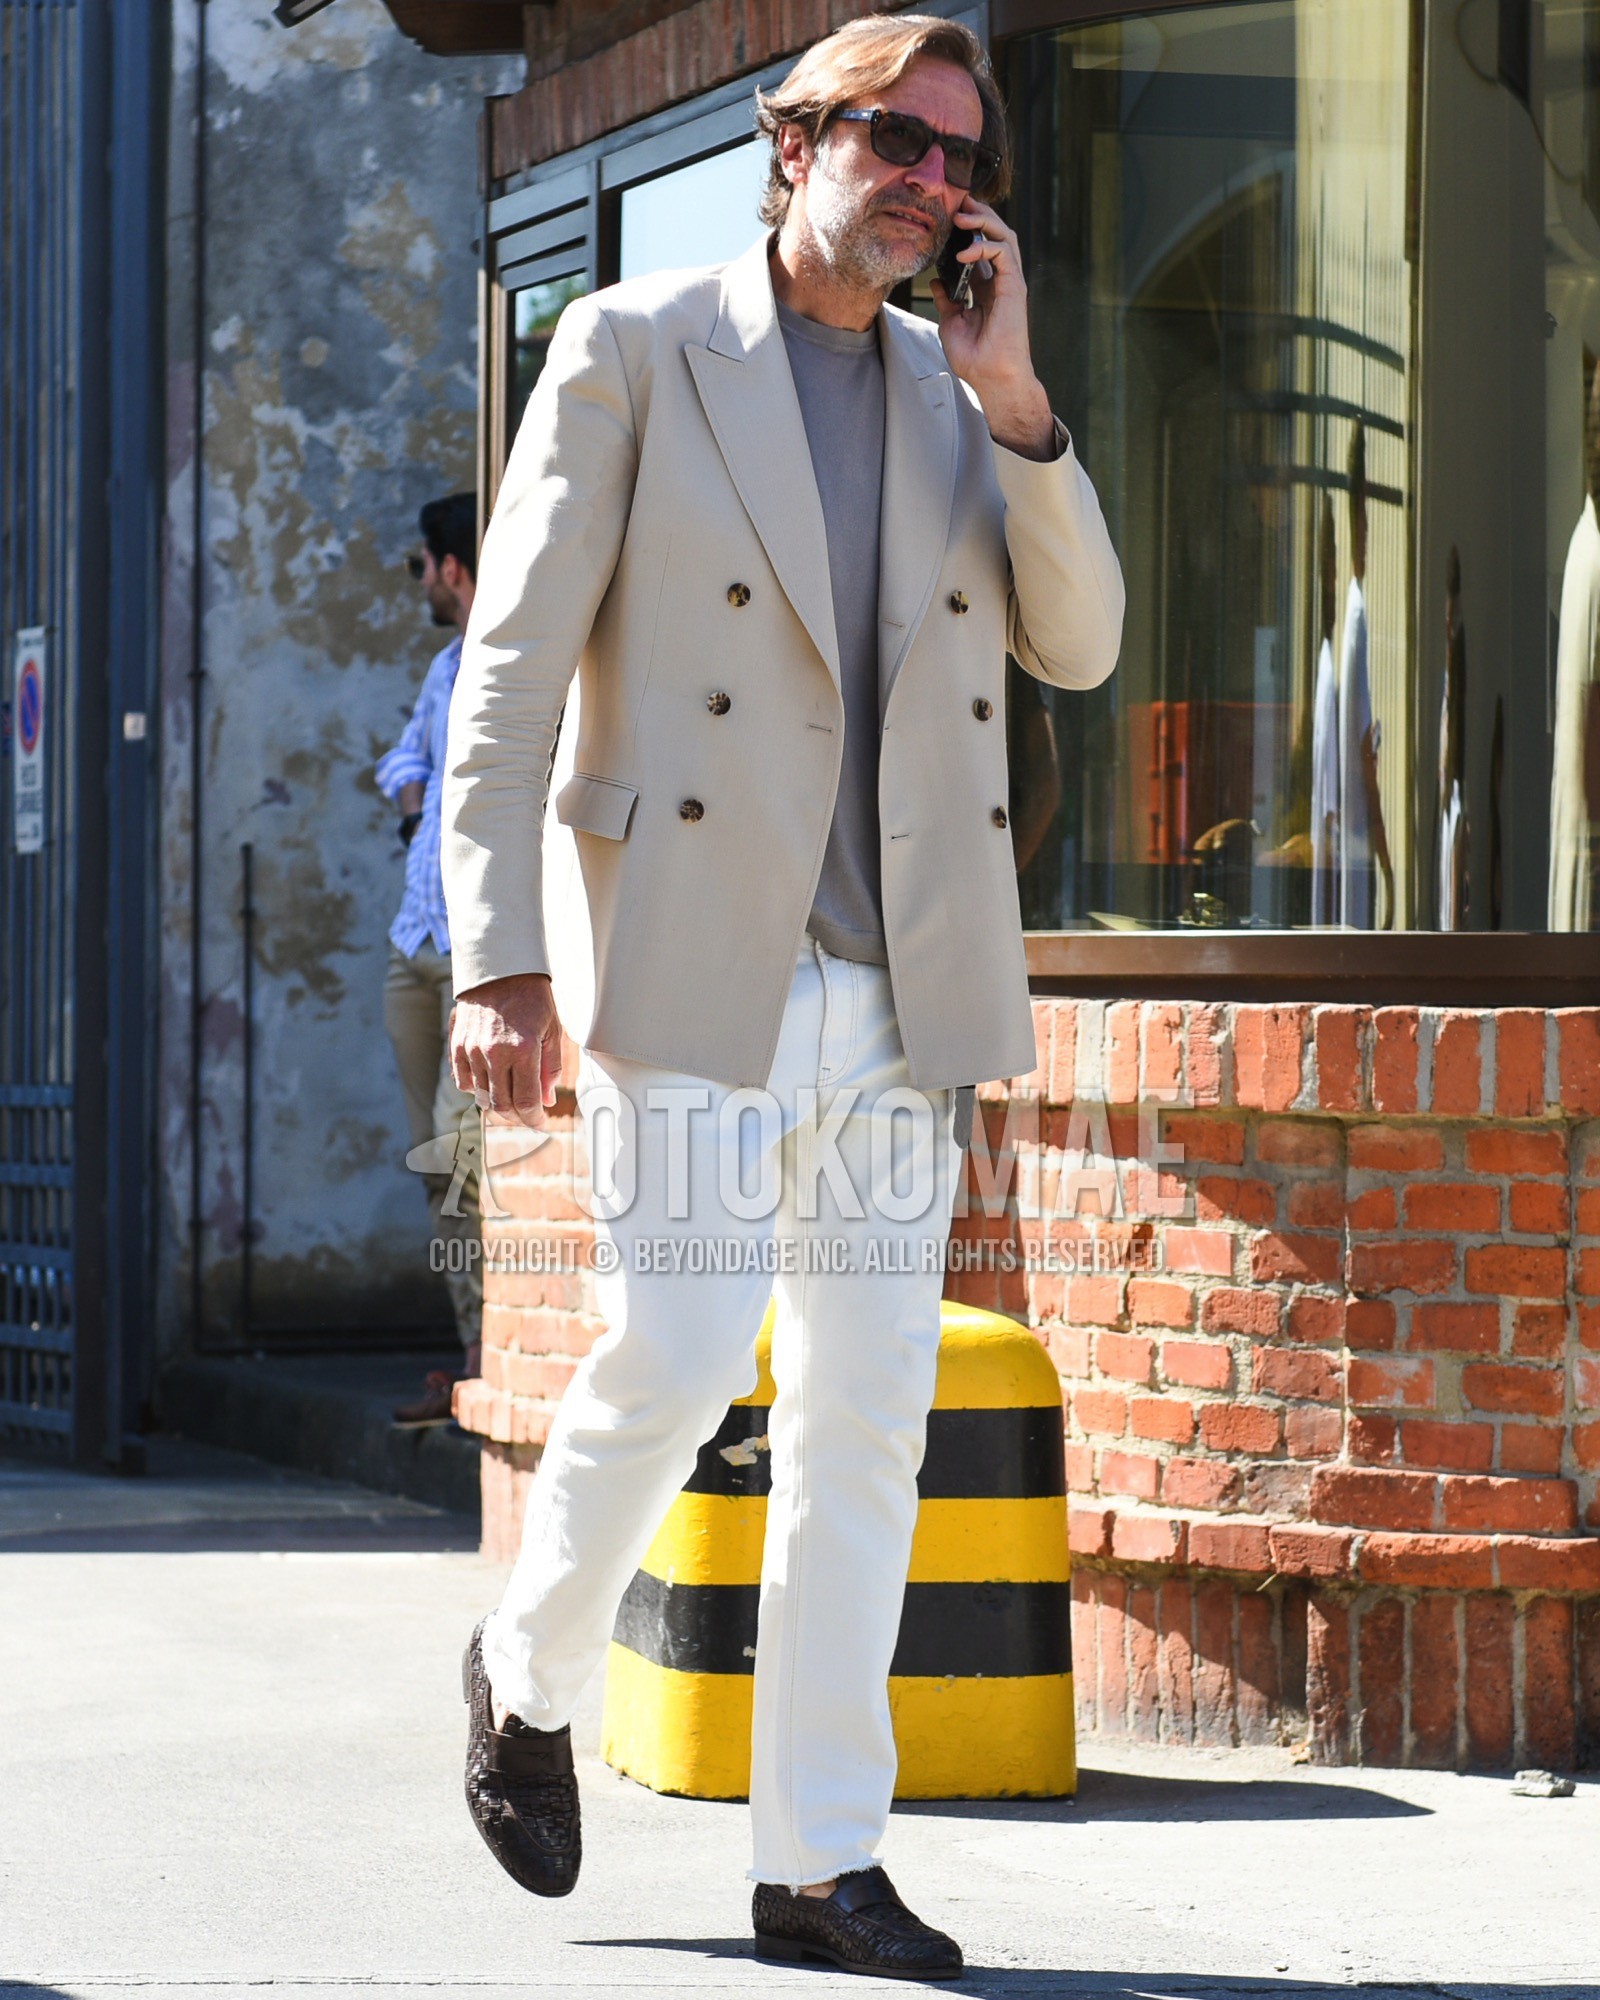 Men's spring summer outfit with brown tortoiseshell sunglasses, beige plain tailored jacket, gray plain t-shirt, white plain cotton pants, brown coin loafers leather shoes.